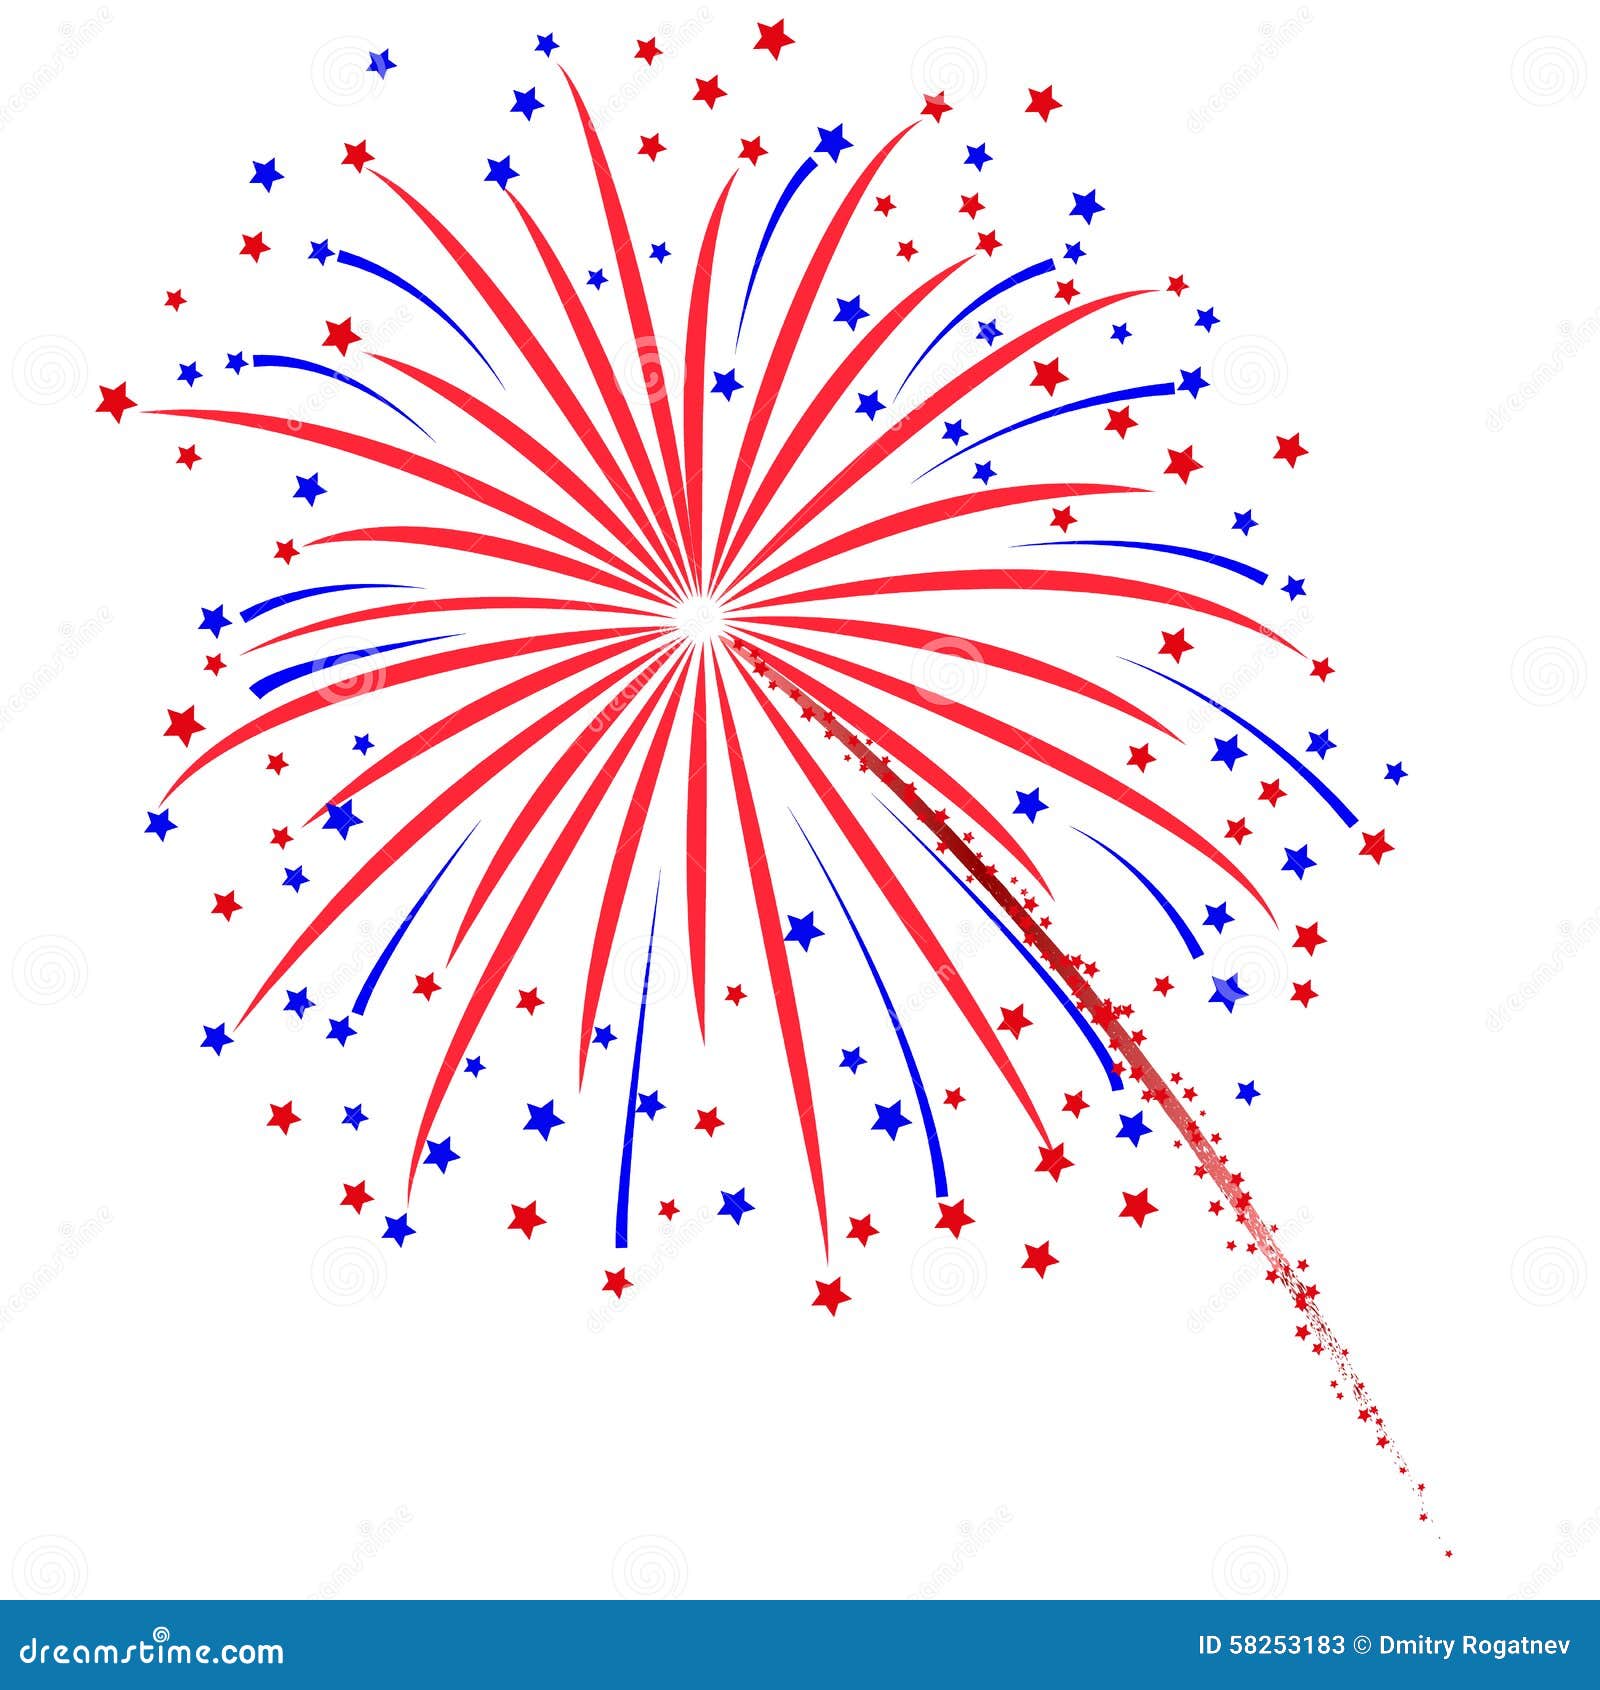 fireworks clipart no background - photo #47